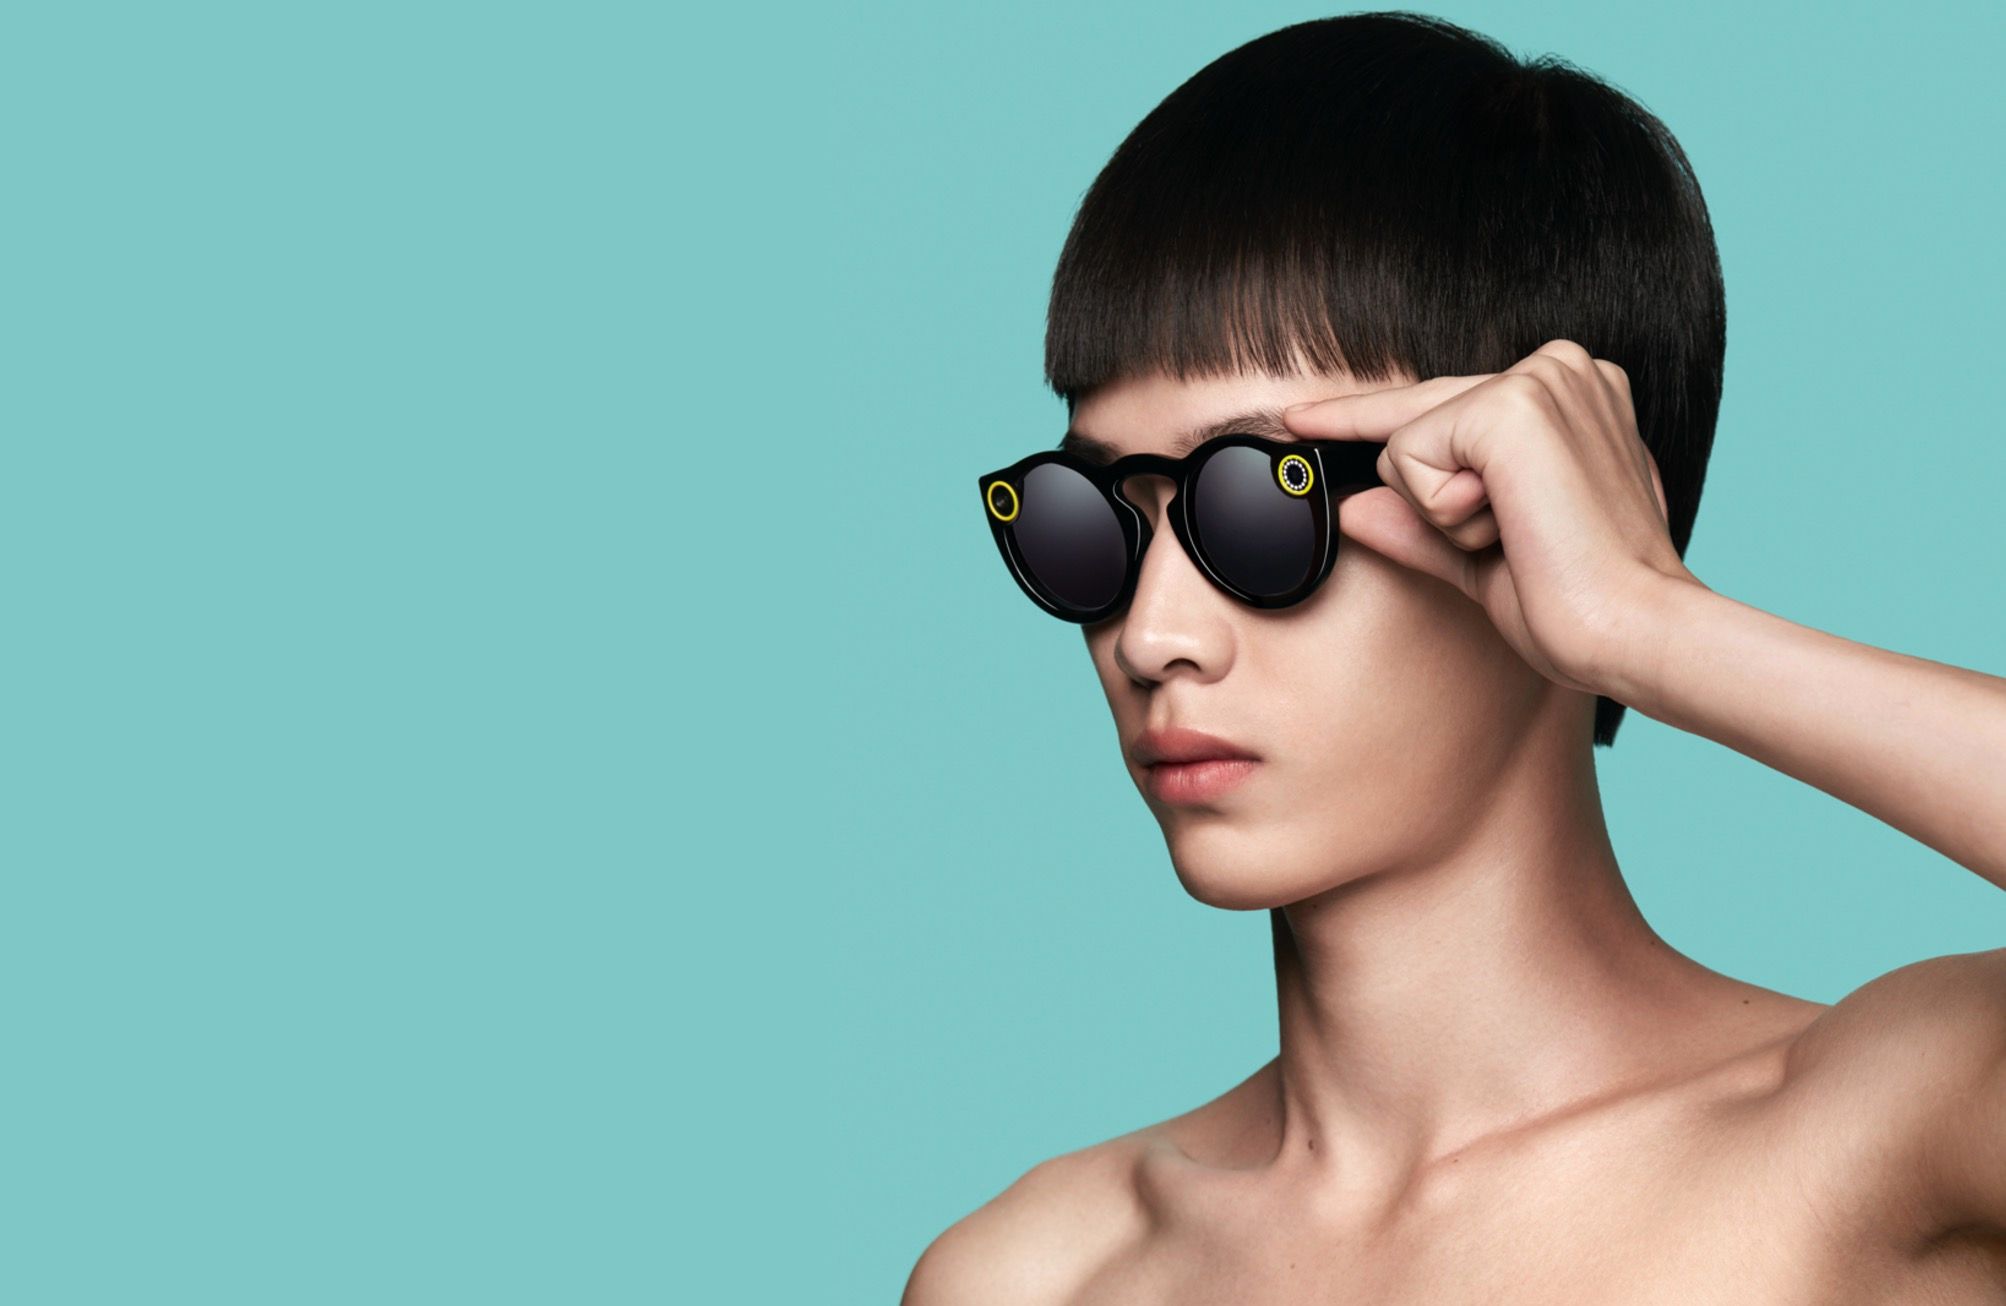 snap spectacles with augmented reality features could be in the works image 1